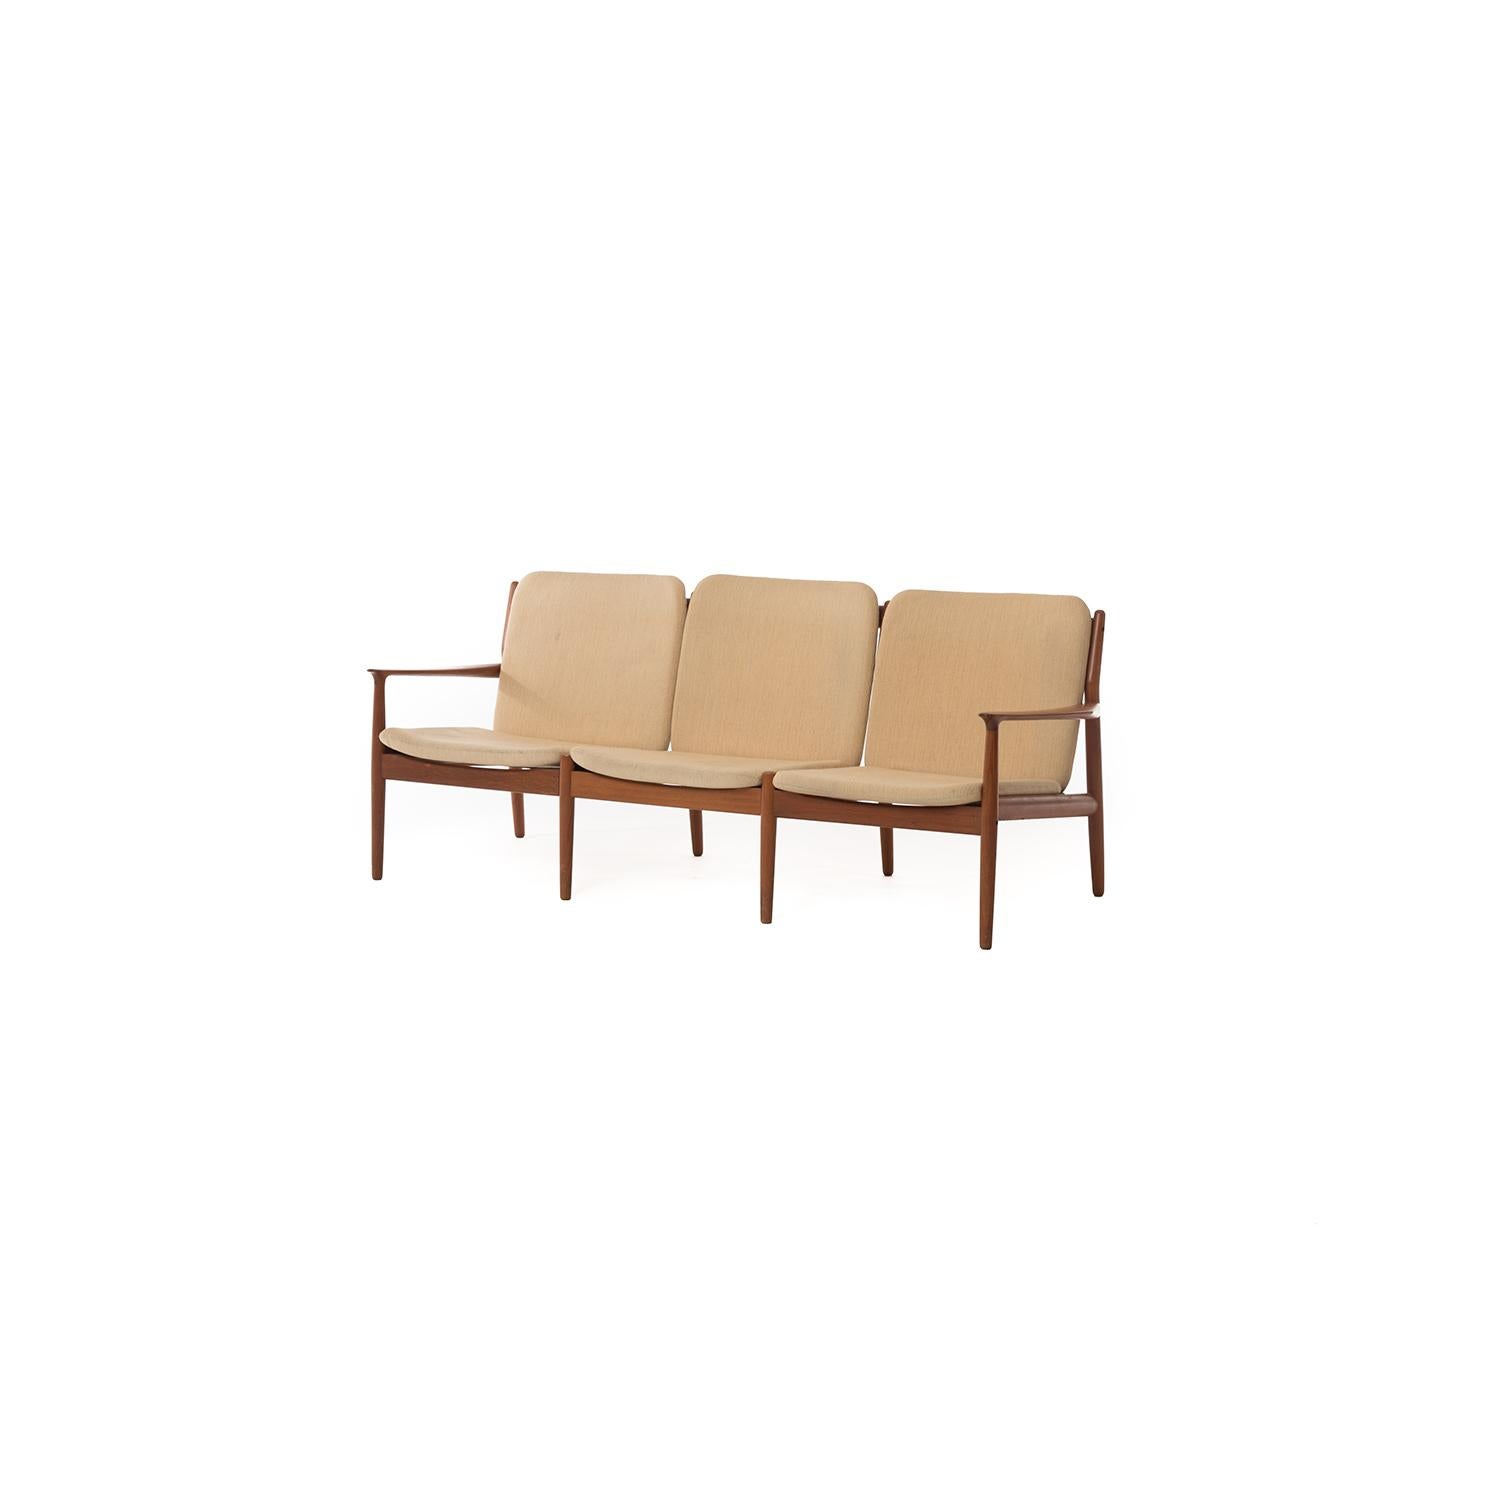 This elegant three-seat sofa rests atop a teak frame featuring sculptural arms. The slatted back makes it attractive from all angles.